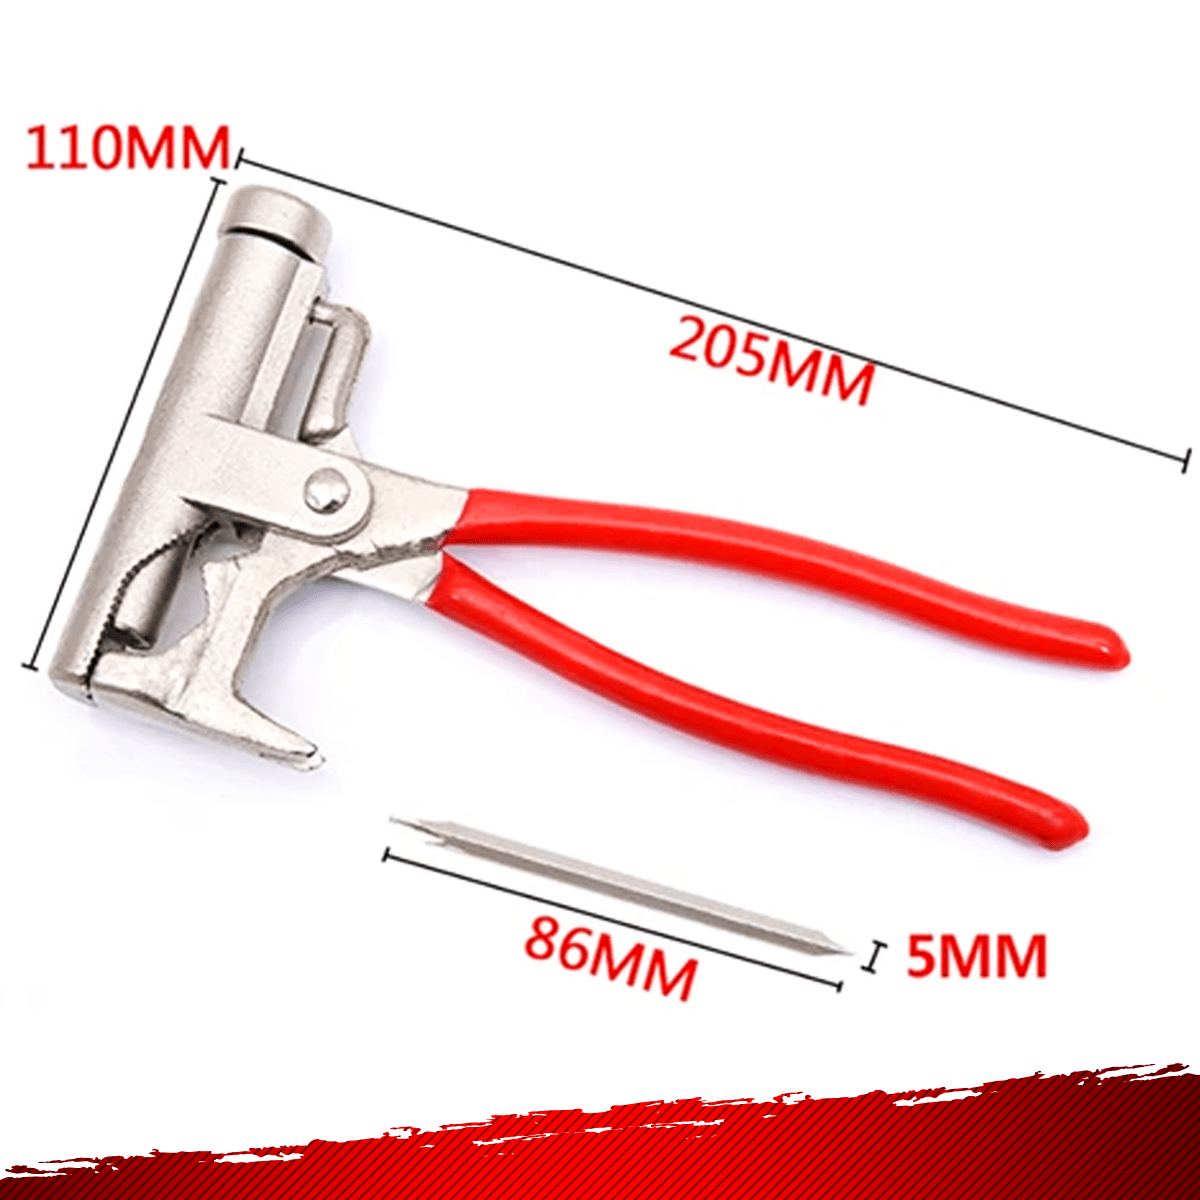 We Are Tool Store Hammer Multi-Functional Universal Hammer